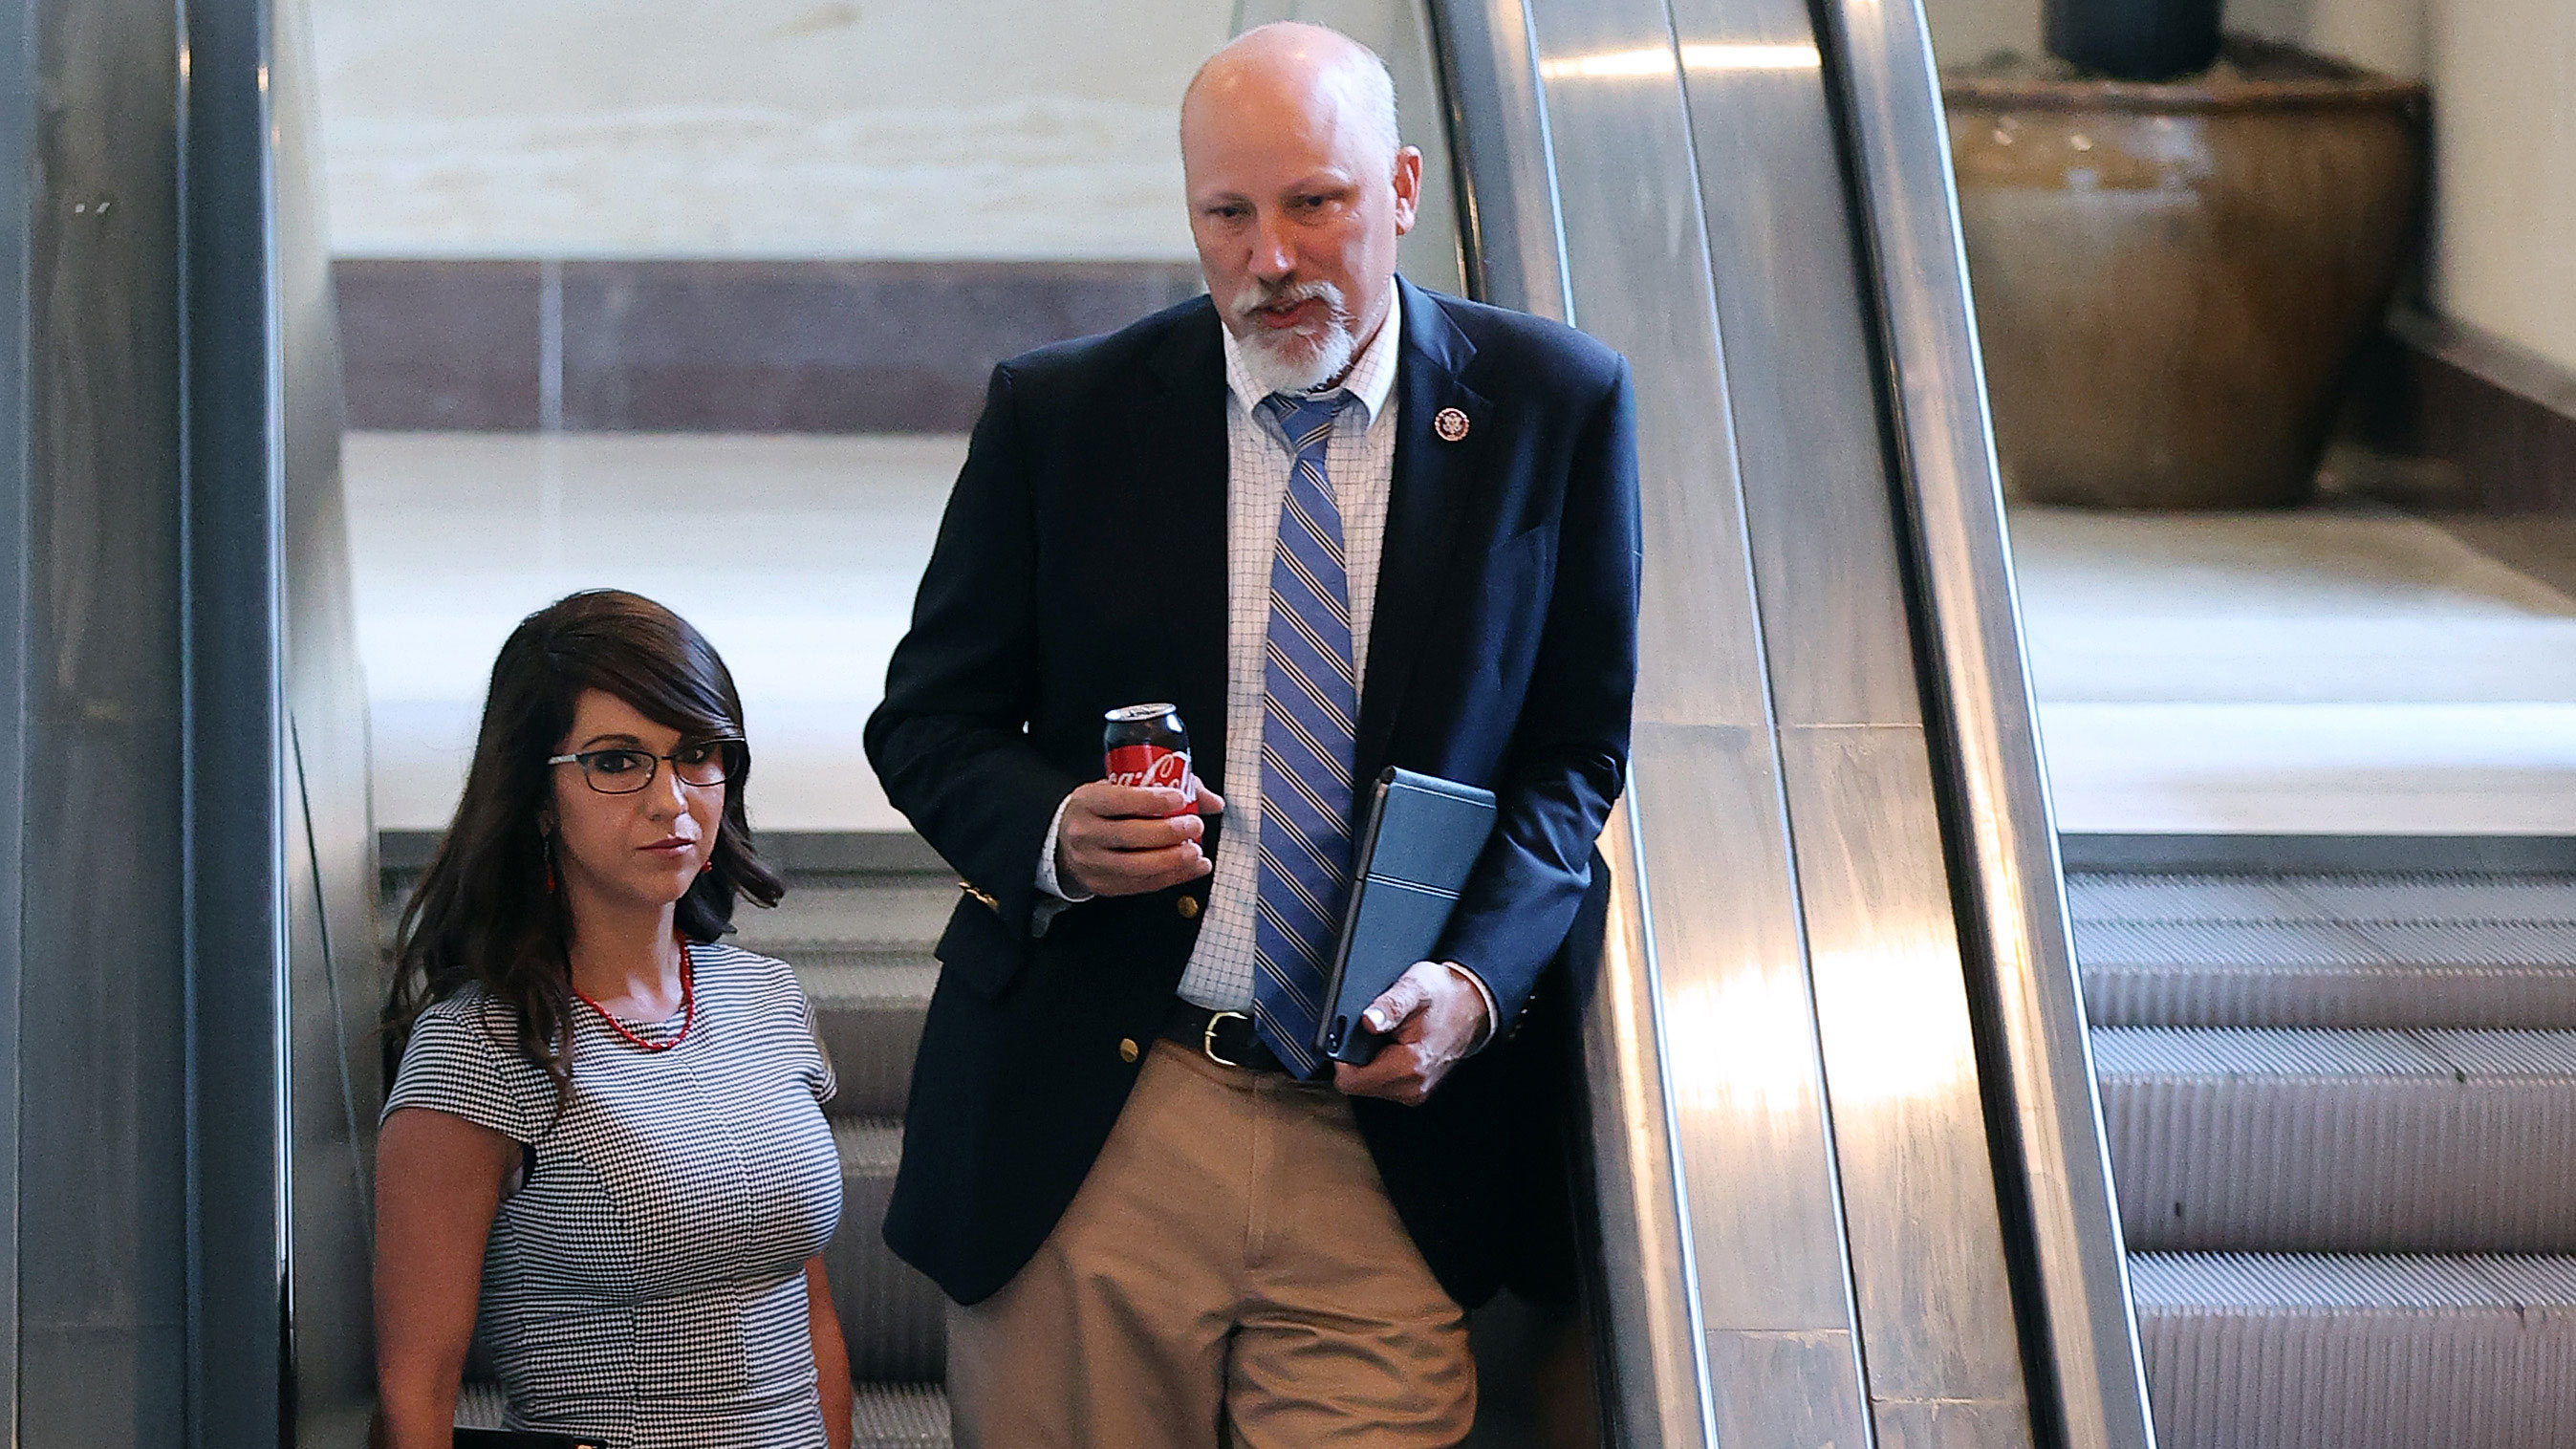 Reps. Lauren Boebert, left, and Chip Roy are pictured on their way to a meeting in the US Capitol Visitor Center on May 14, 2021.